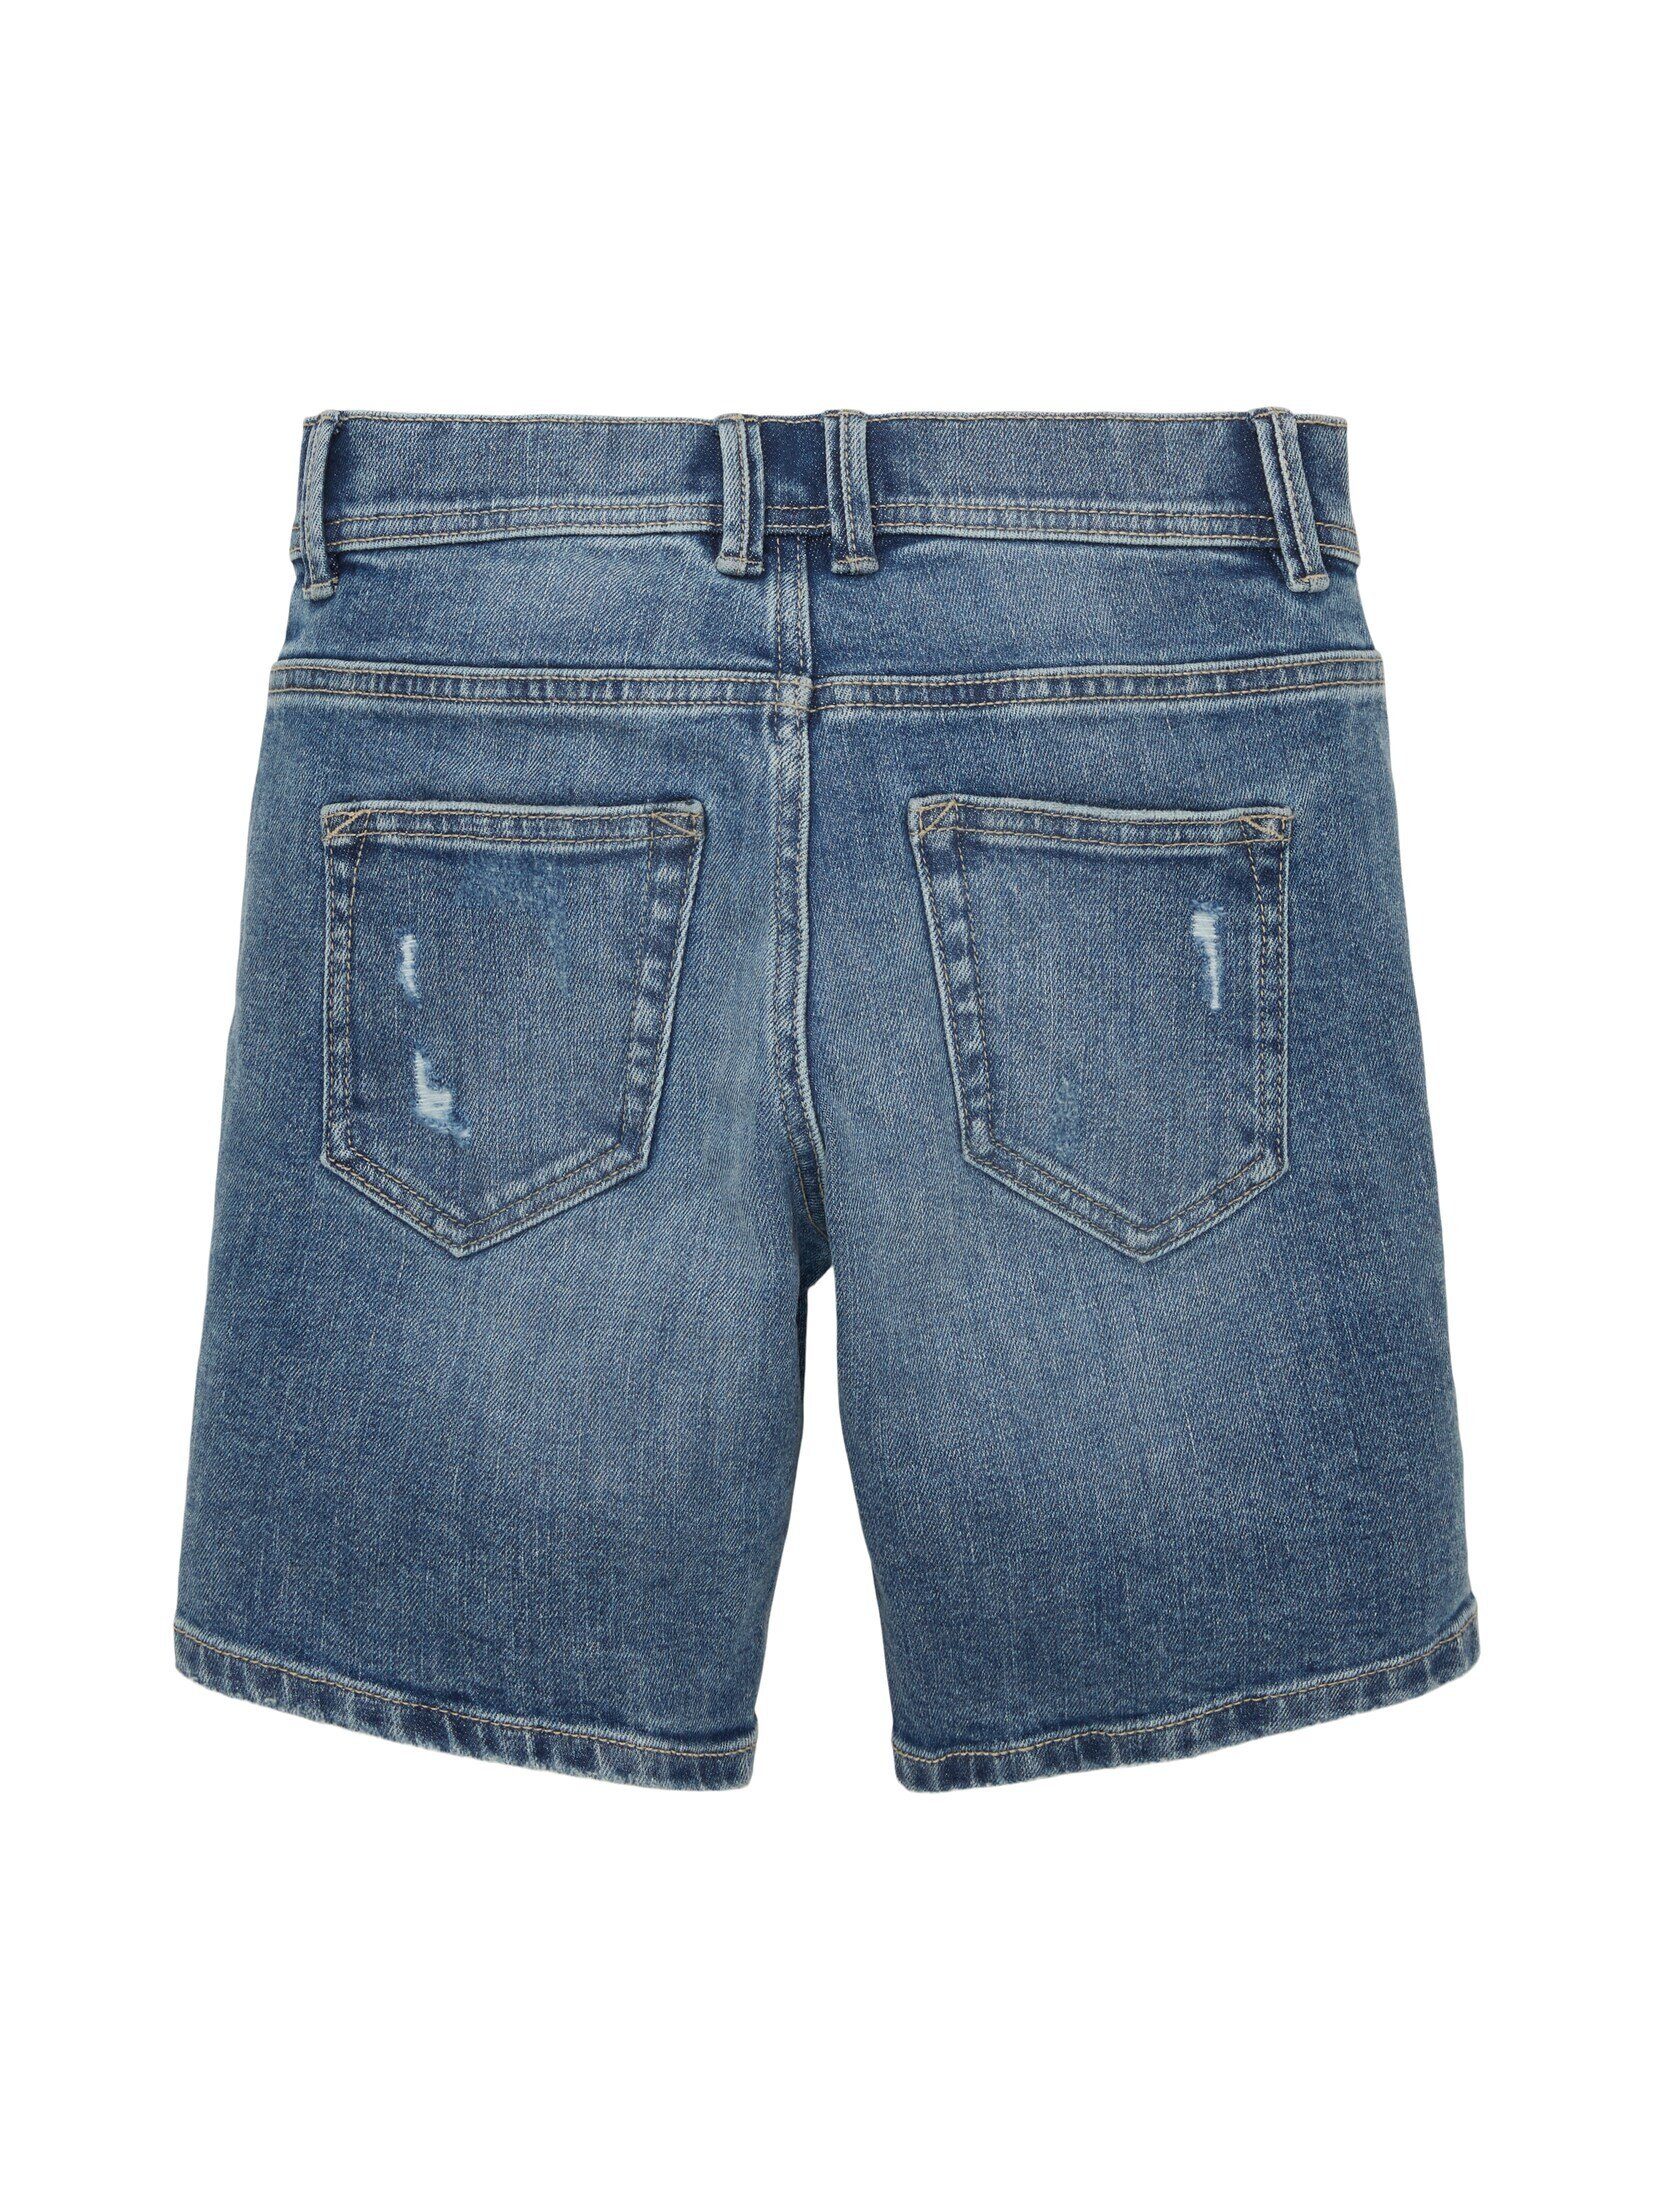 TOM TAILOR Jeansshorts im Jeansshorts Used-Look